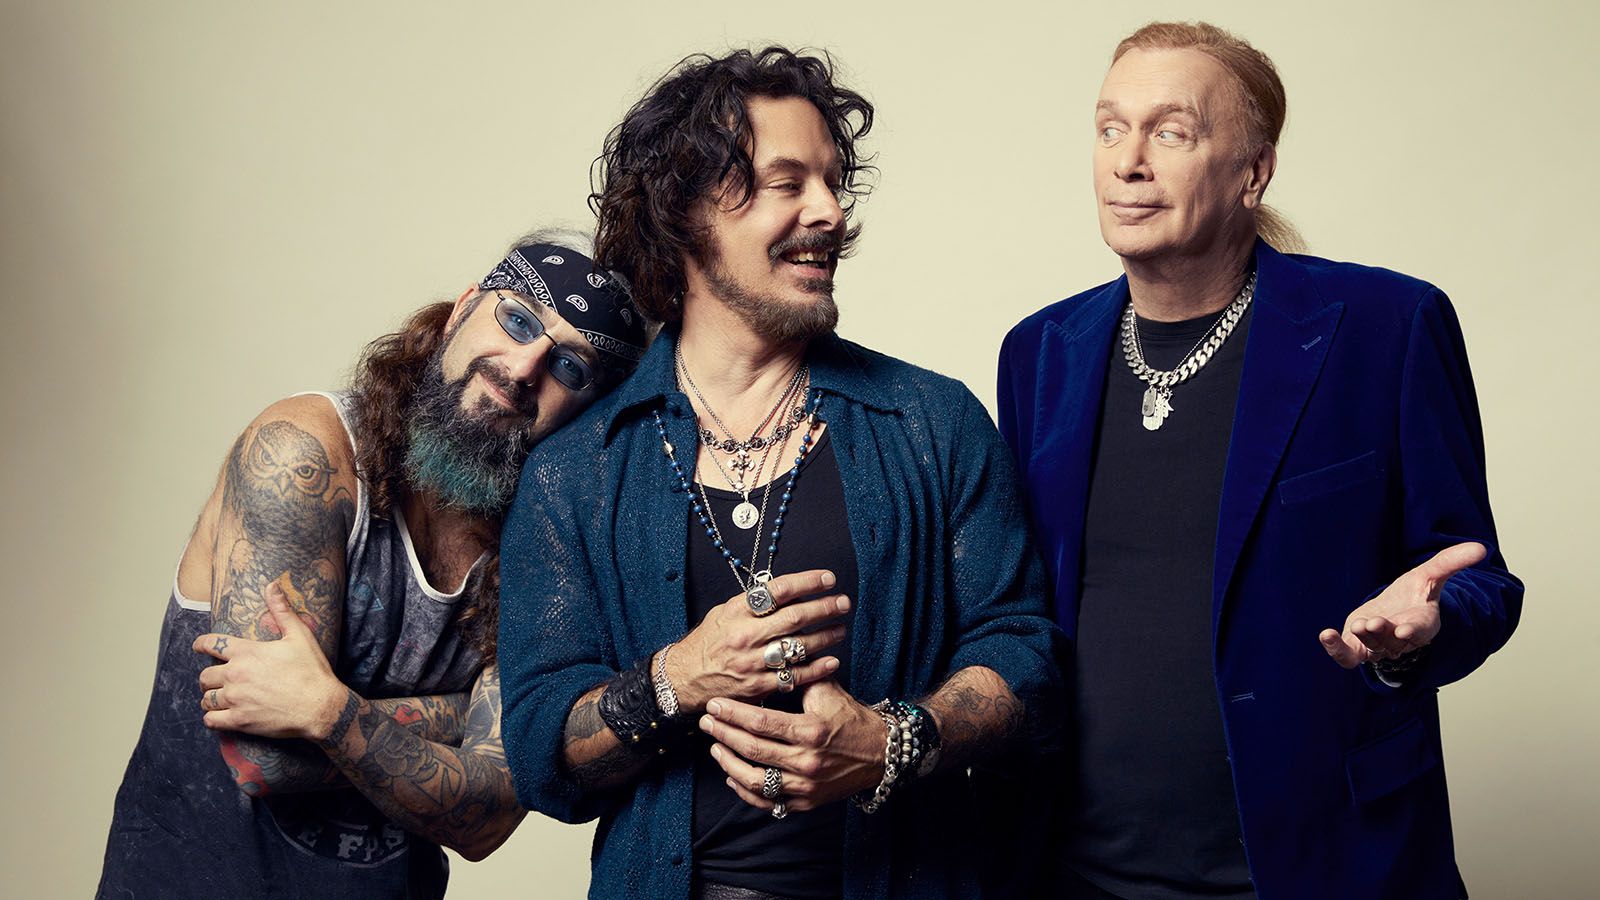 The Winery Dogs, from left, Mike Portnoy, Richie Kotzen, and Billy Sheehan, will be at Eagles Theatre in Wabash on Friday, March 3.